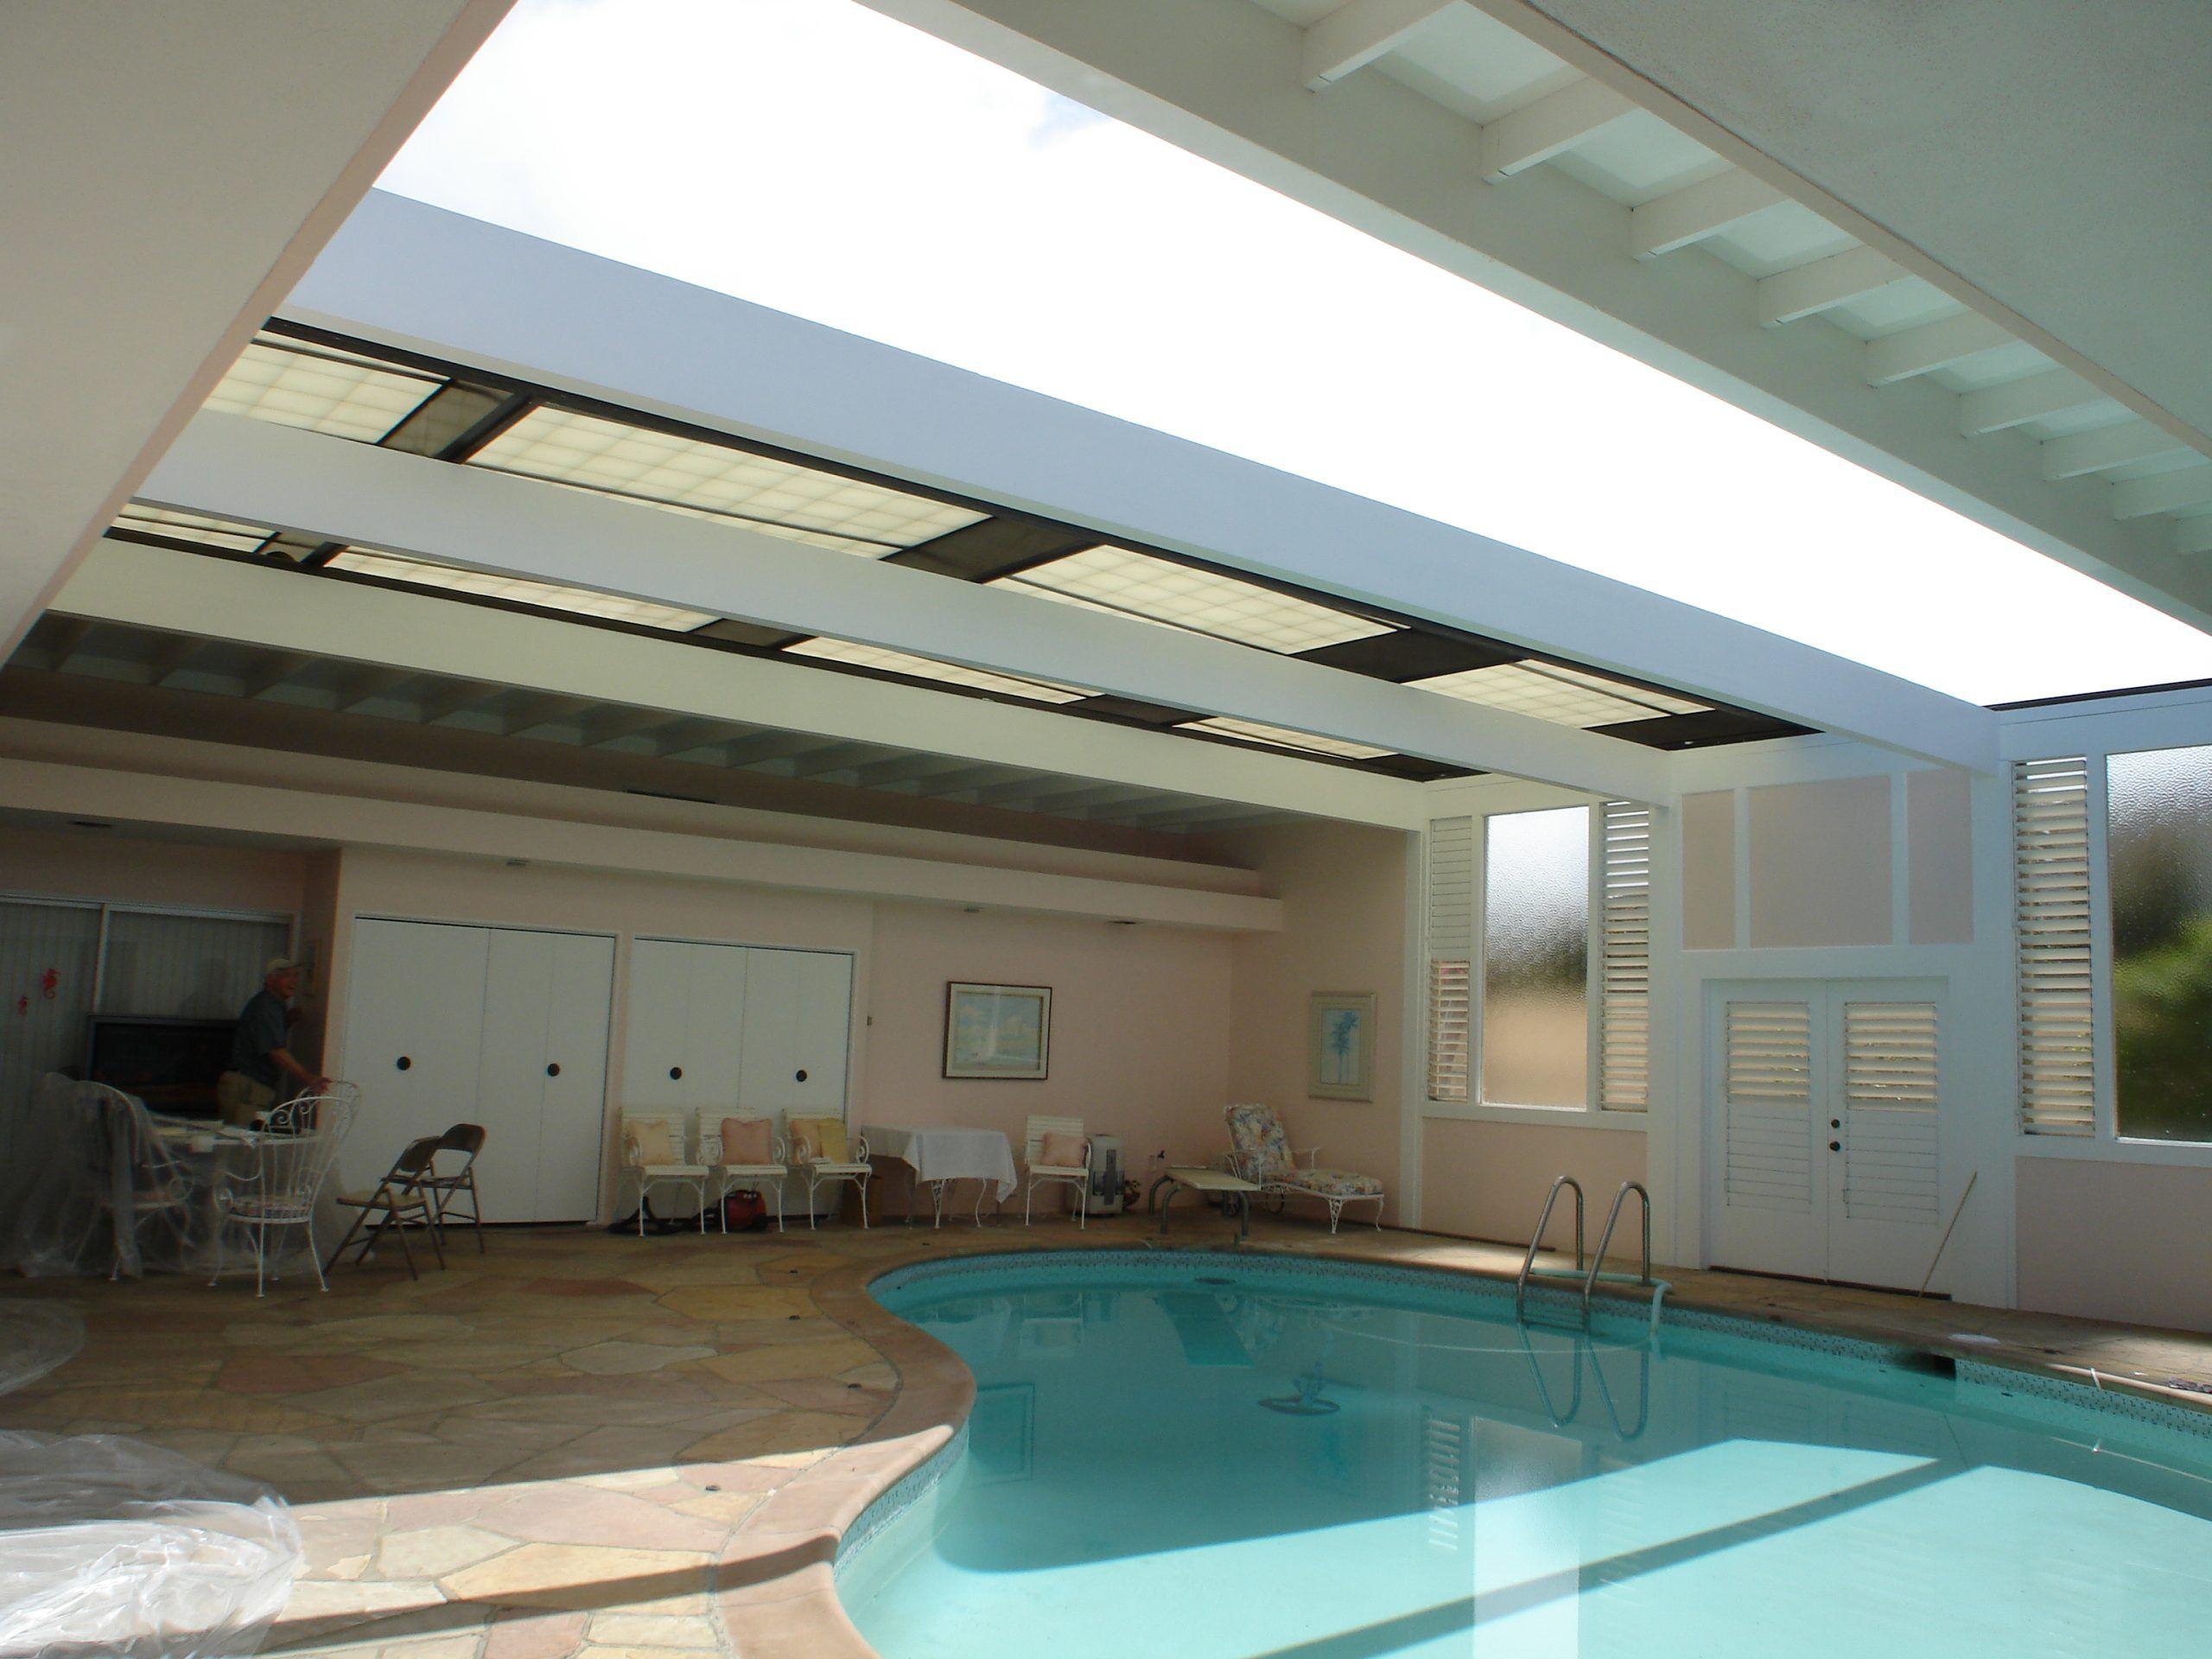 Residential retractable pool roof